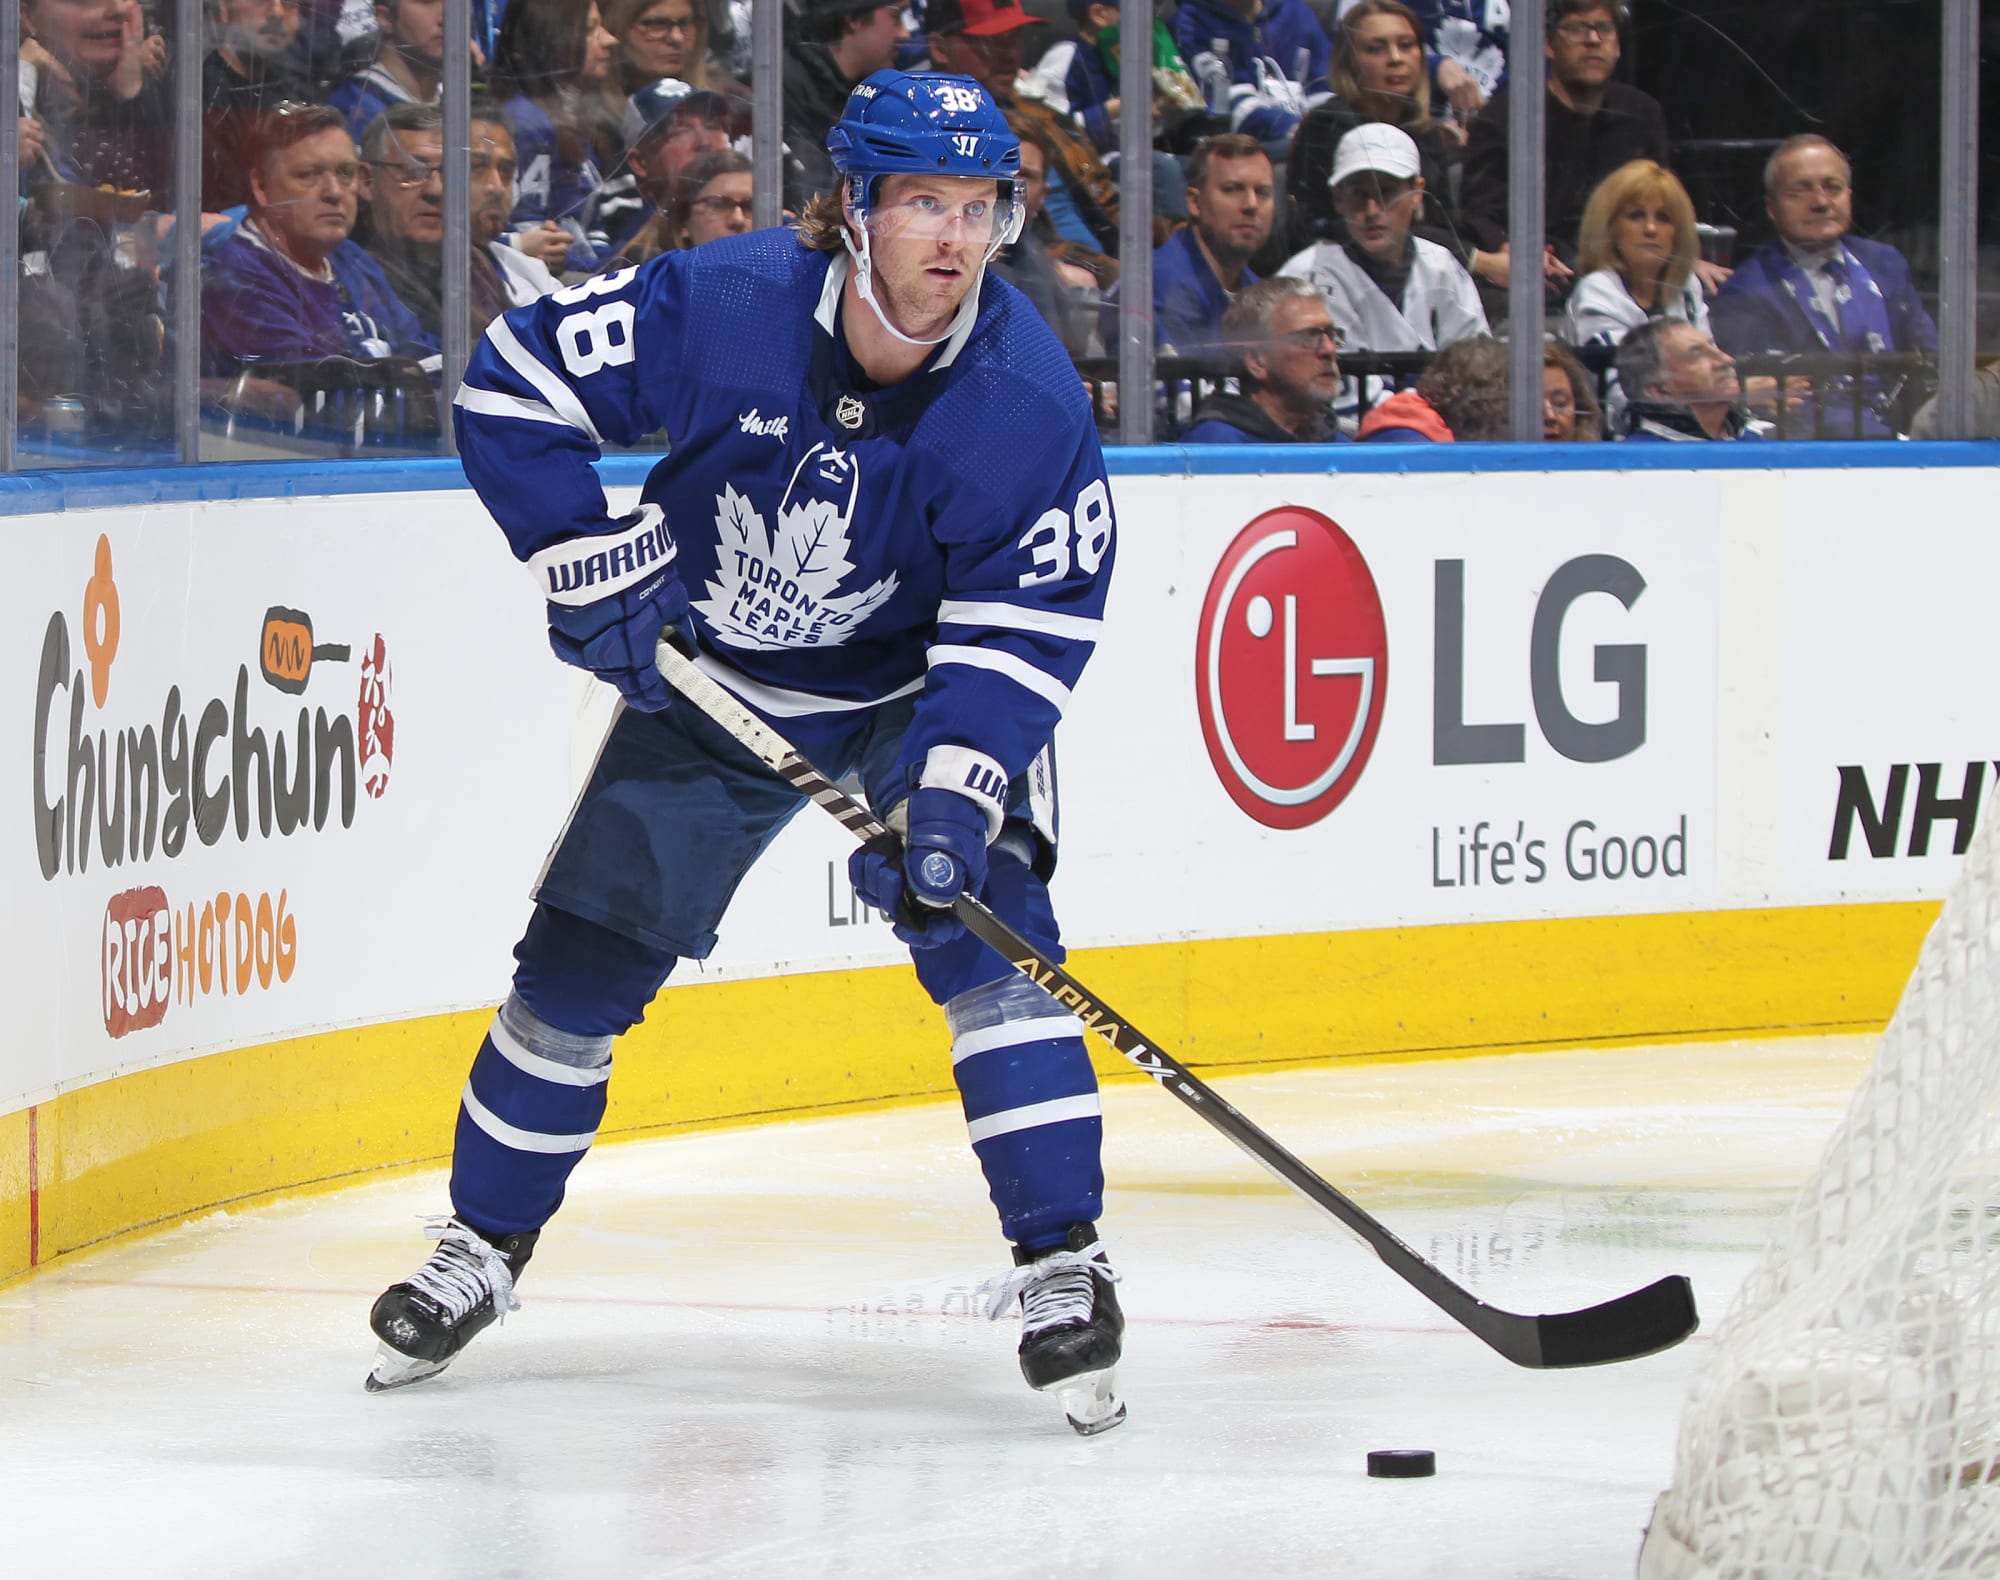 Rasmus Sandin Gives the Toronto Maple Leafs So Many Options